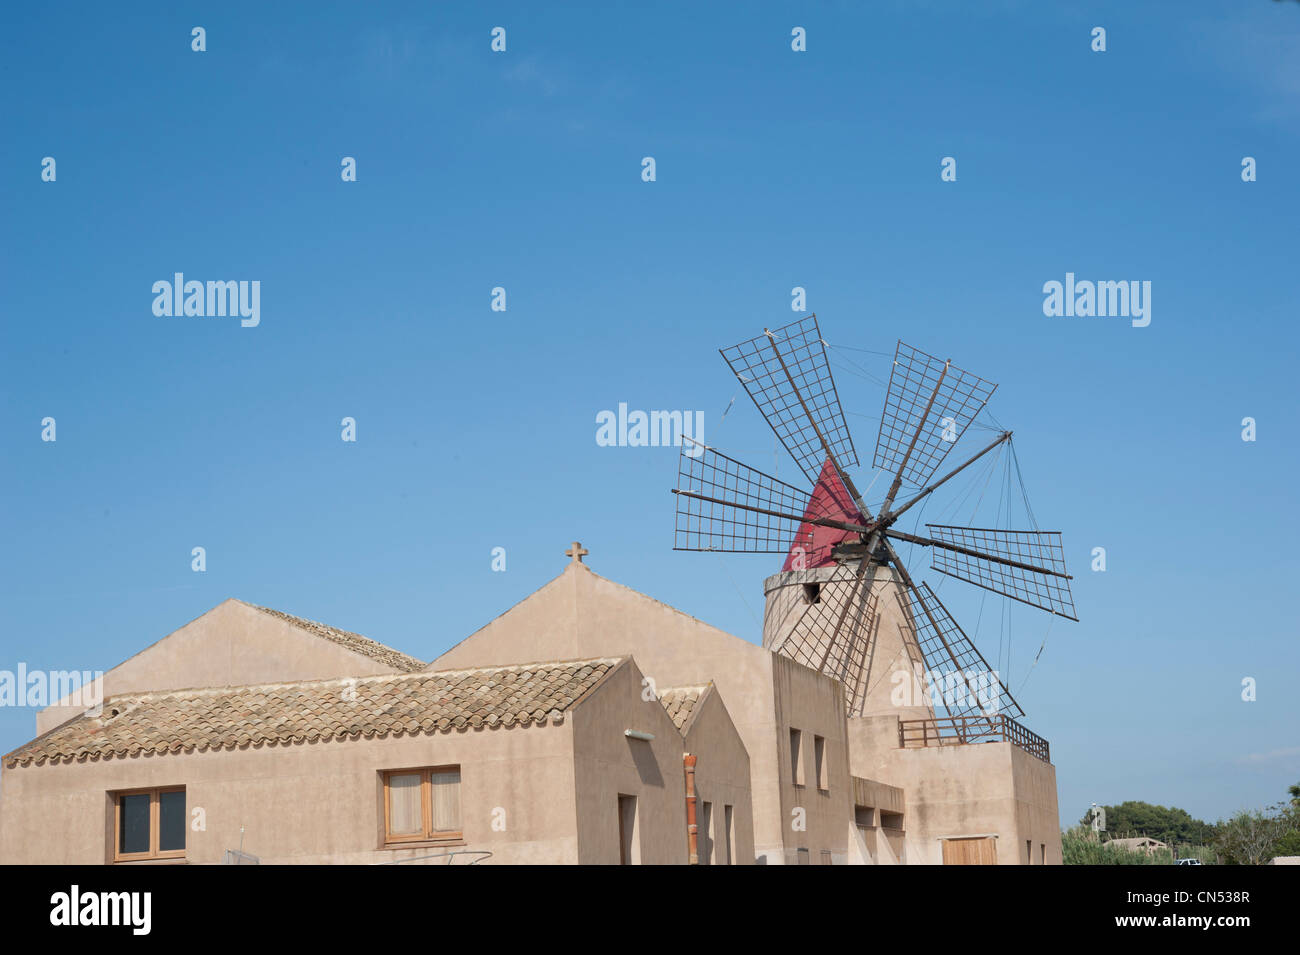 Traditional windmill used for grinding evaporated sea salt, Mozia, Trapani Province, Sicily, Italy Stock Photo